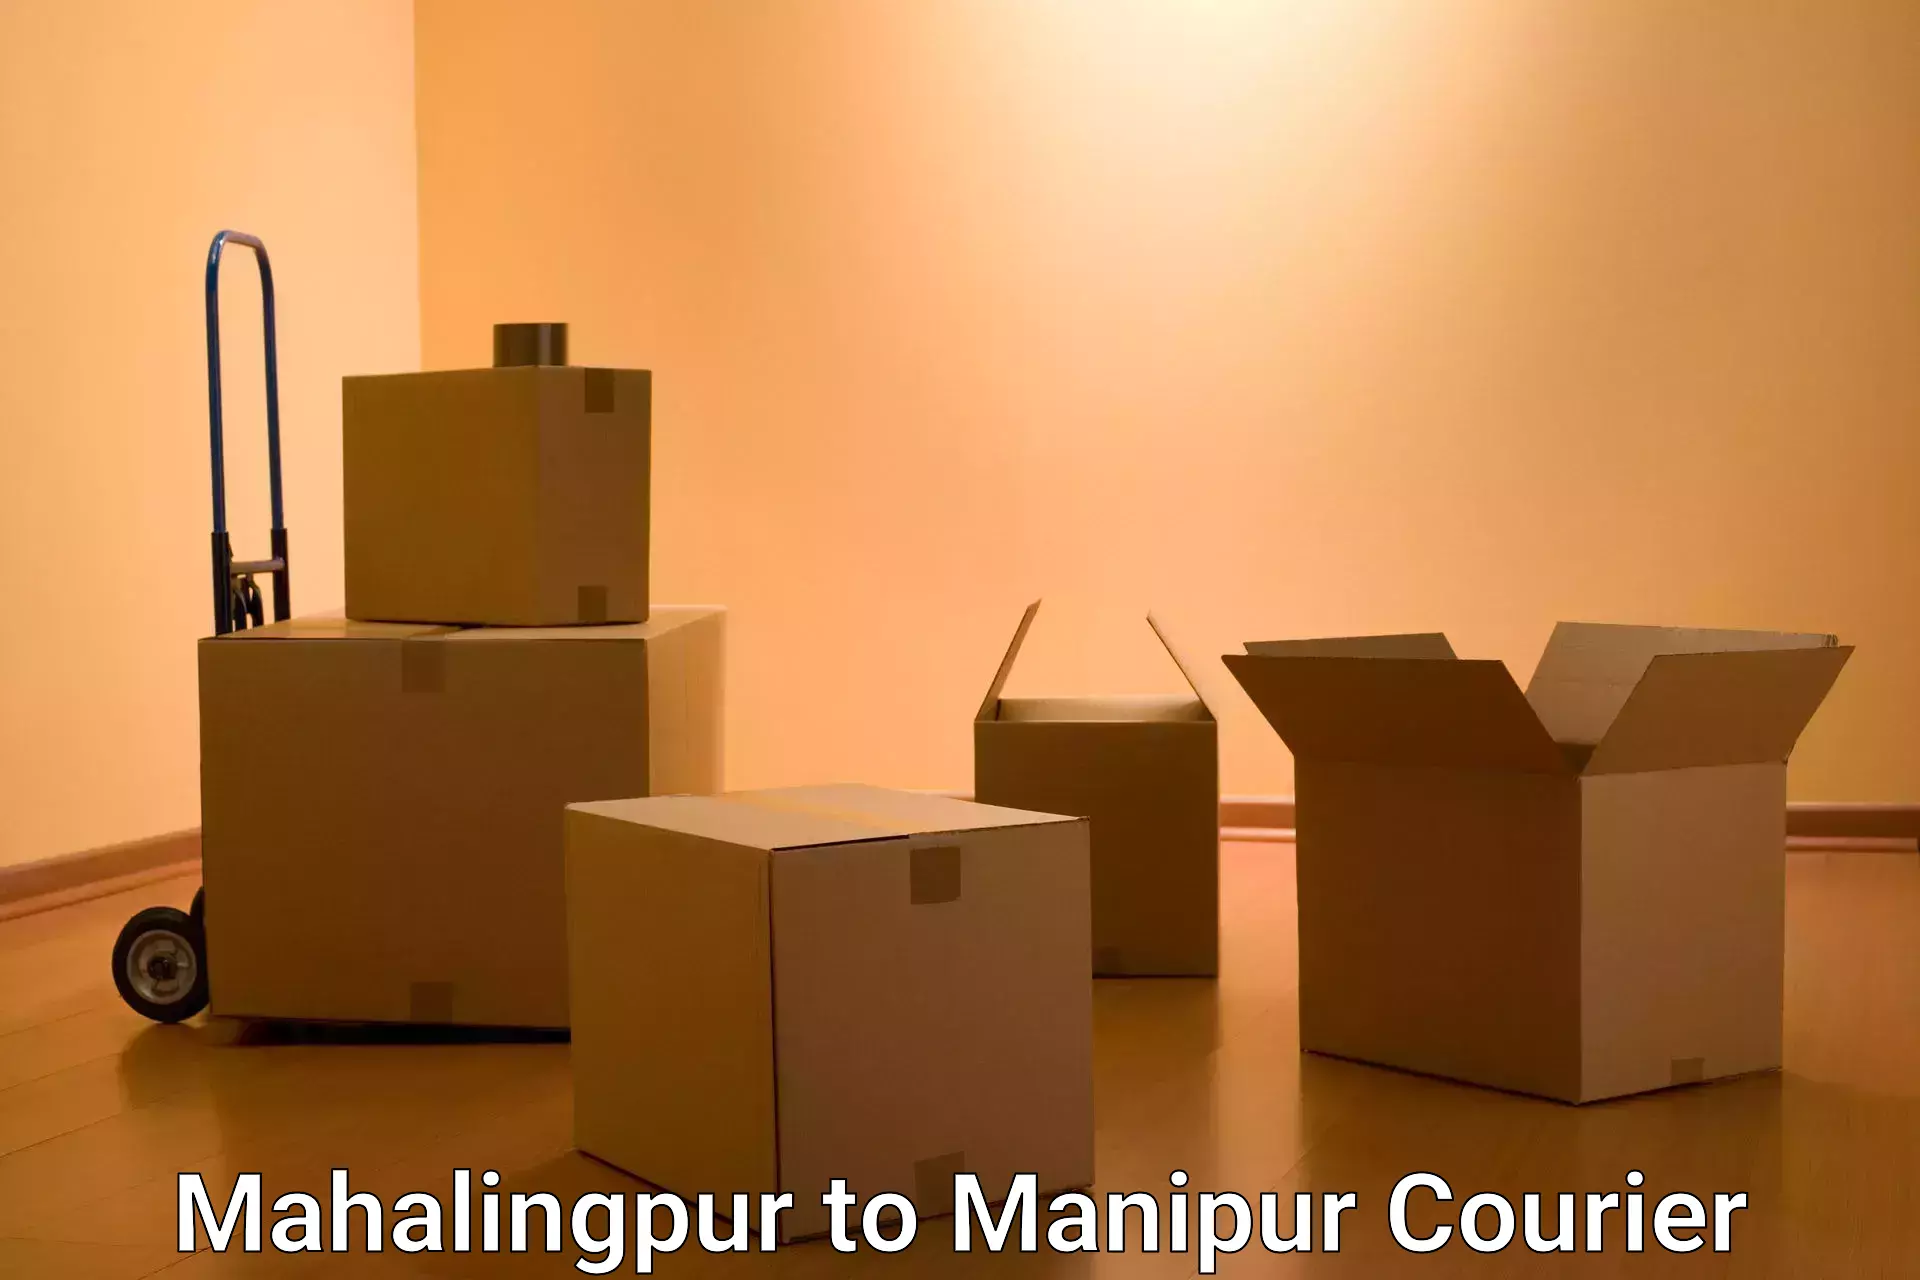 Doorstep delivery service Mahalingpur to Imphal